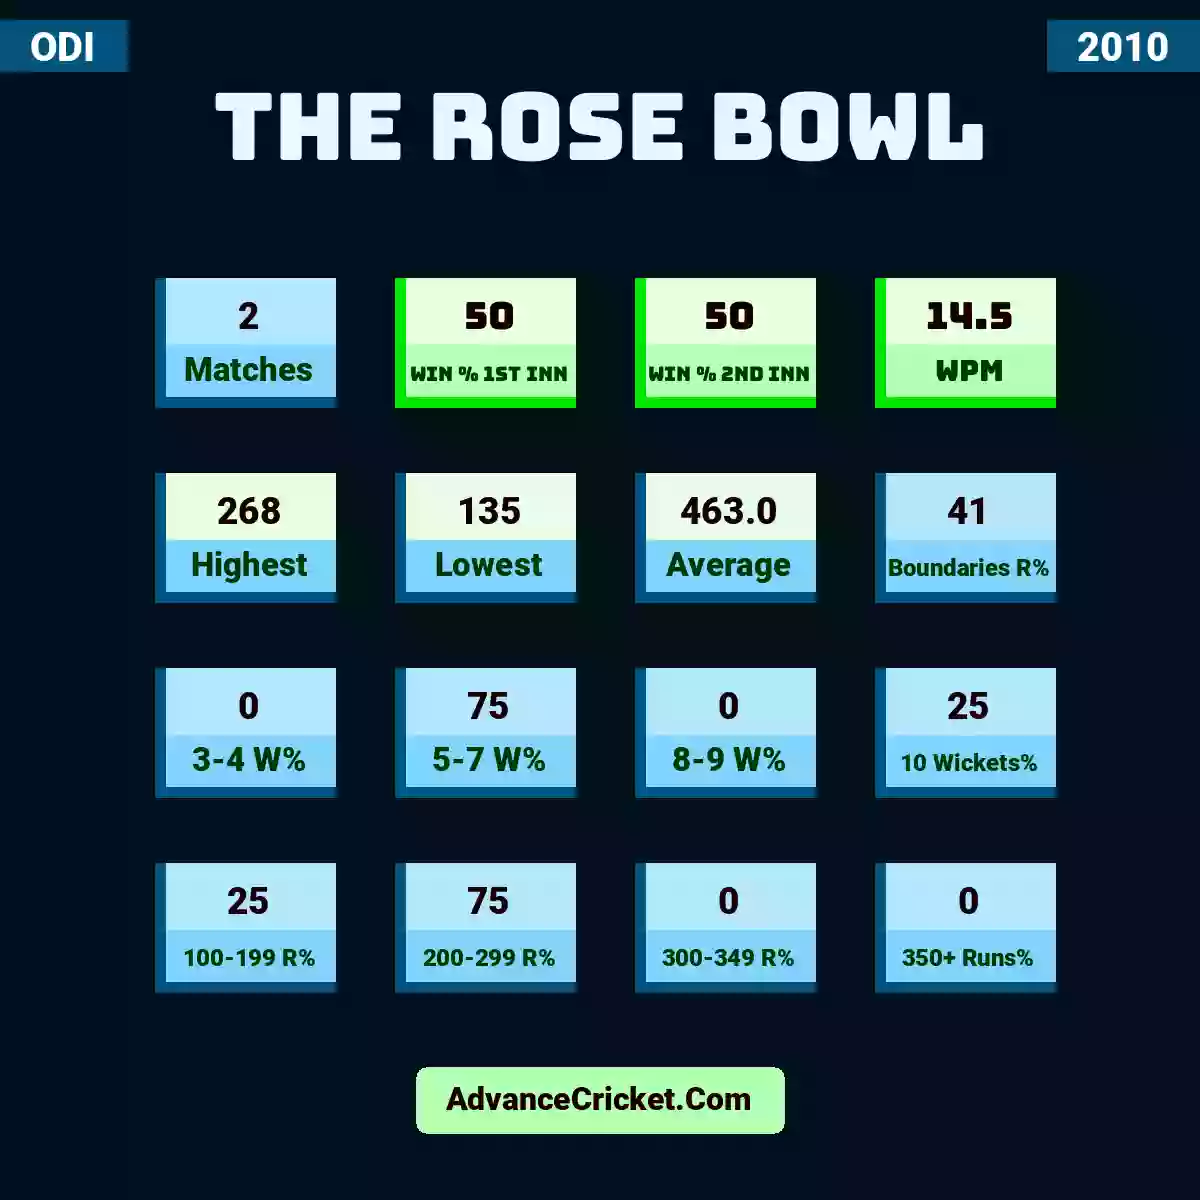 Image showing The Rose Bowl with Matches: 2, Win % 1st Inn: 50, Win % 2nd Inn: 50, WPM: 14.5, Highest: 268, Lowest: 135, Average: 463.0, Boundaries R%: 41, 3-4 W%: 0, 5-7 W%: 75, 8-9 W%: 0, 10 Wickets%: 25, 100-199 R%: 25, 200-299 R%: 75, 300-349 R%: 0, 350+ Runs%: 0.